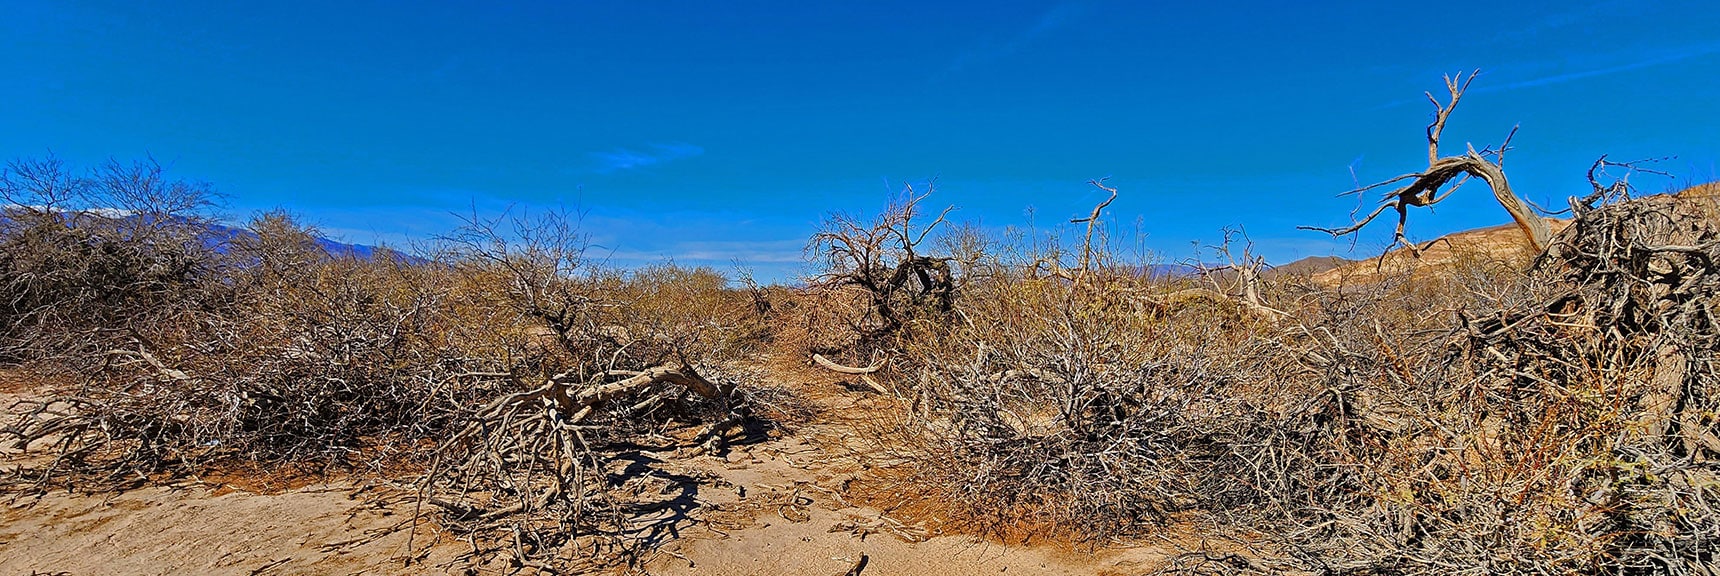 The Mesquite Trees Look In Winter, When They Are Dormant | Mesquite Grove | Death Valley, California | David Smith | Las Vegas Area Trails